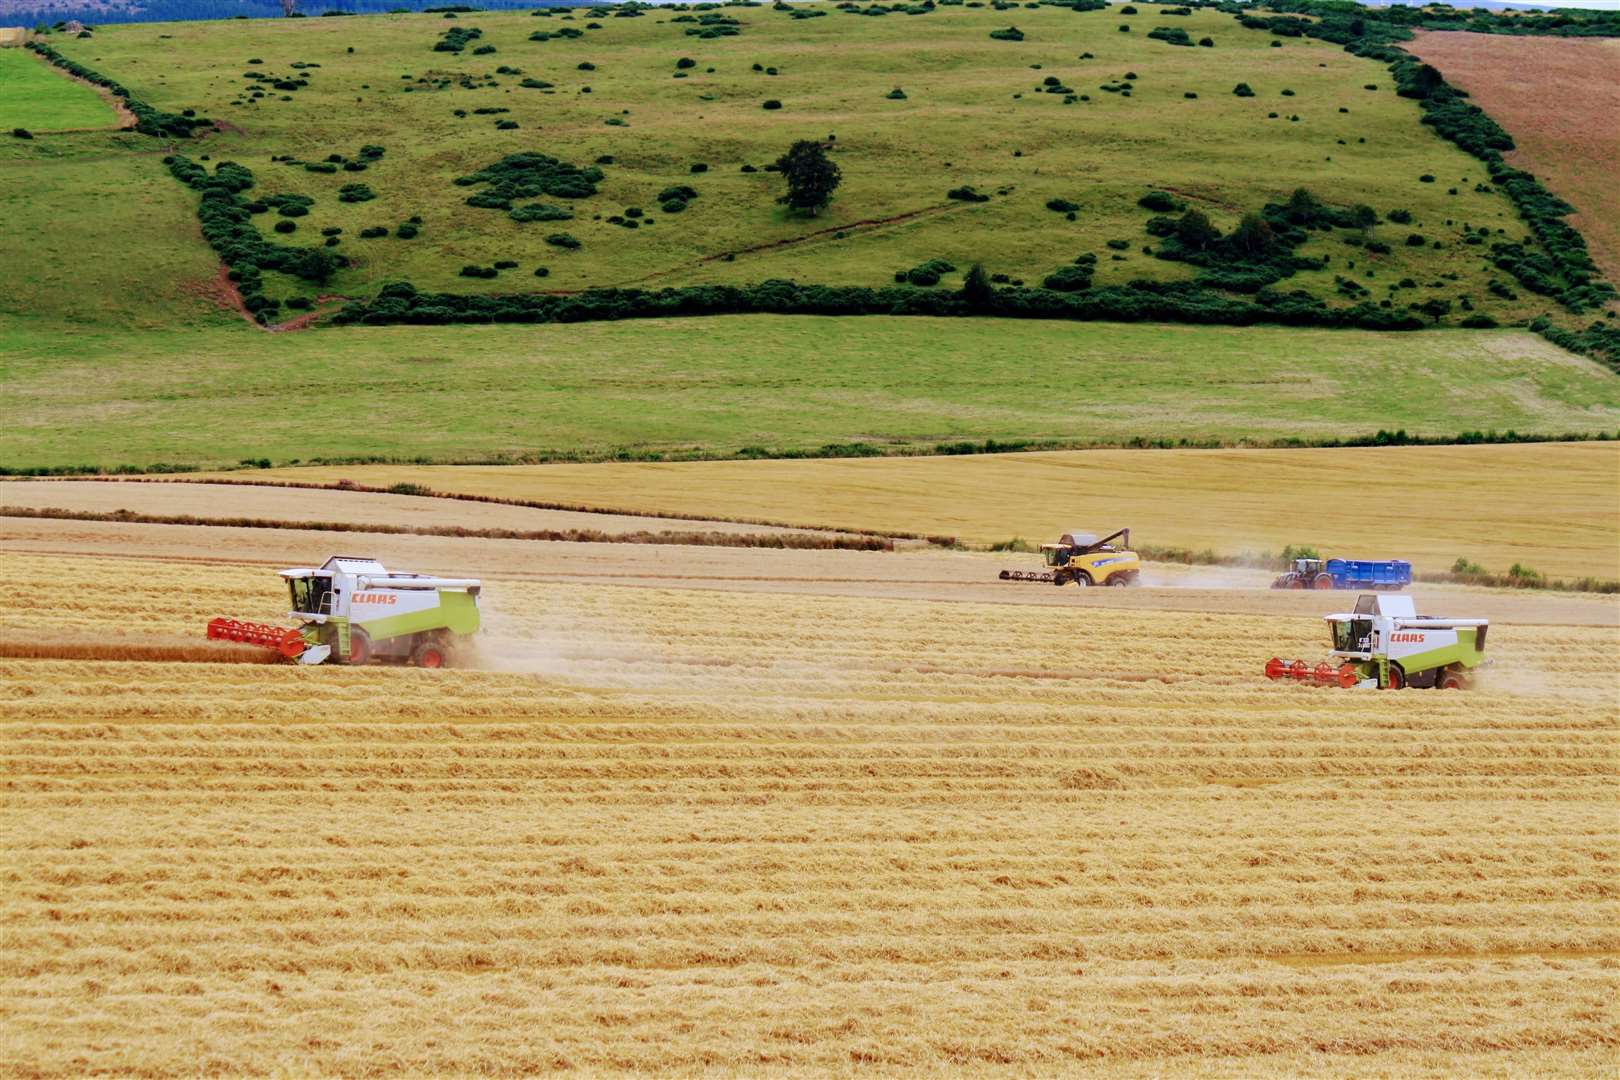 Harvest time brings a lot more agricultural vehicles onto rural roads and with it the increased danger of collisions.